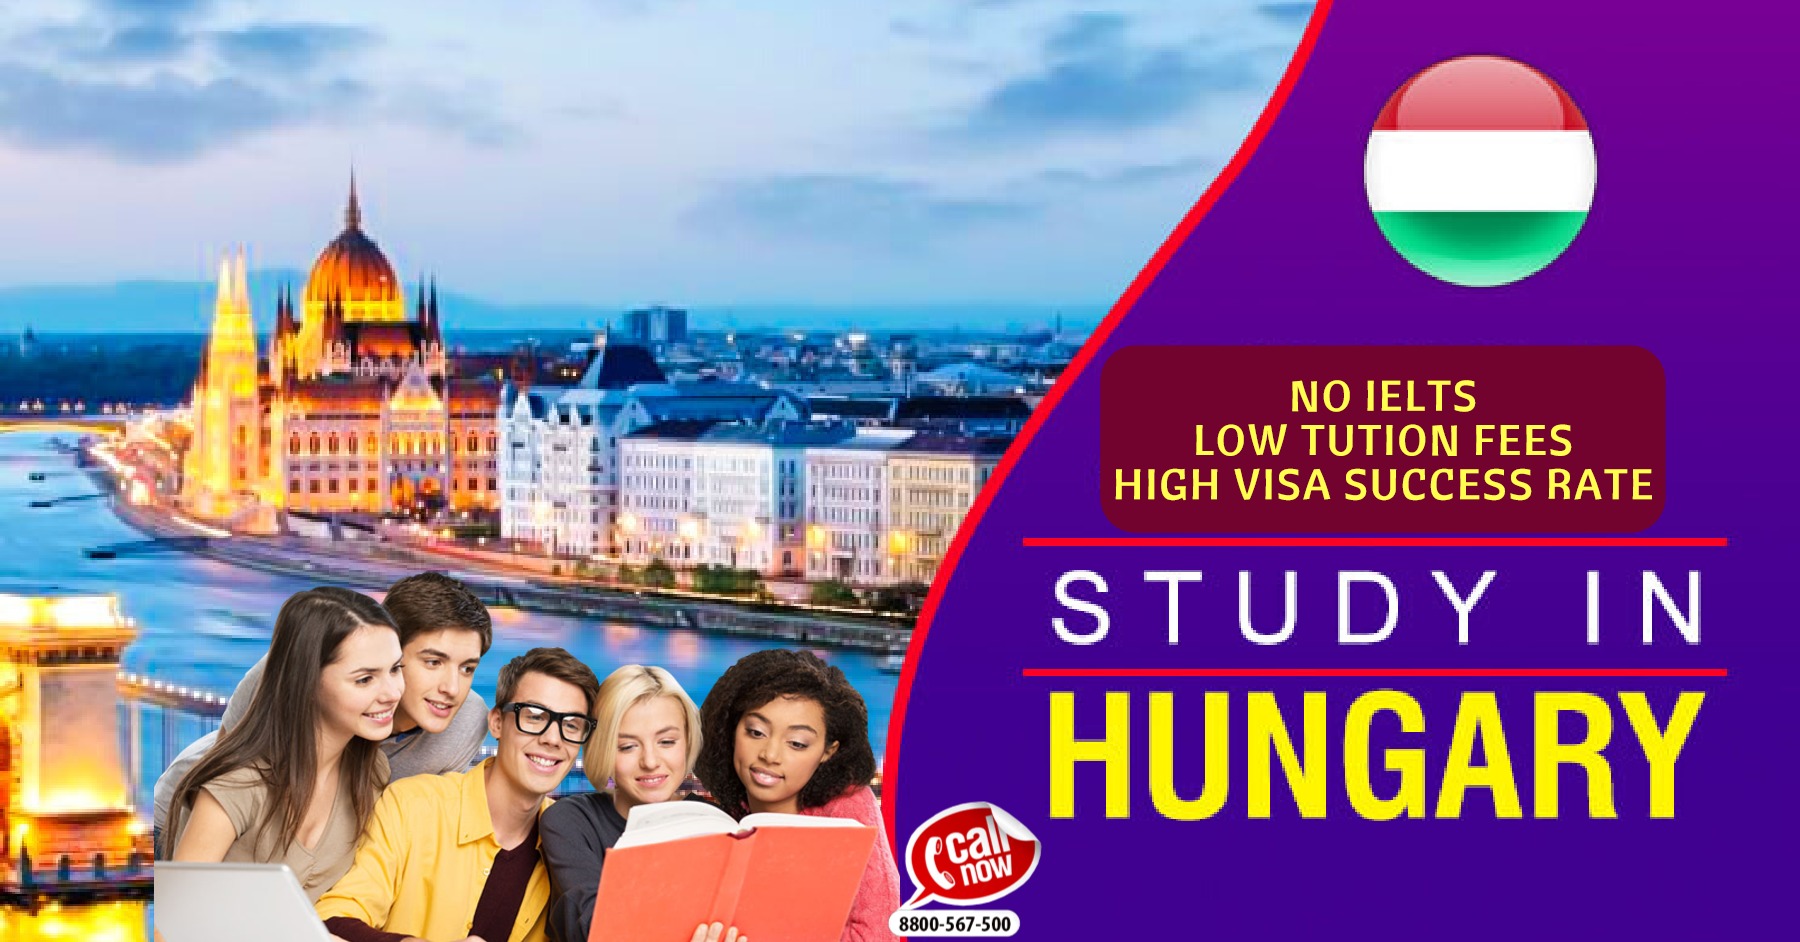 TOP 10 Reasons to Study in HUNGARY